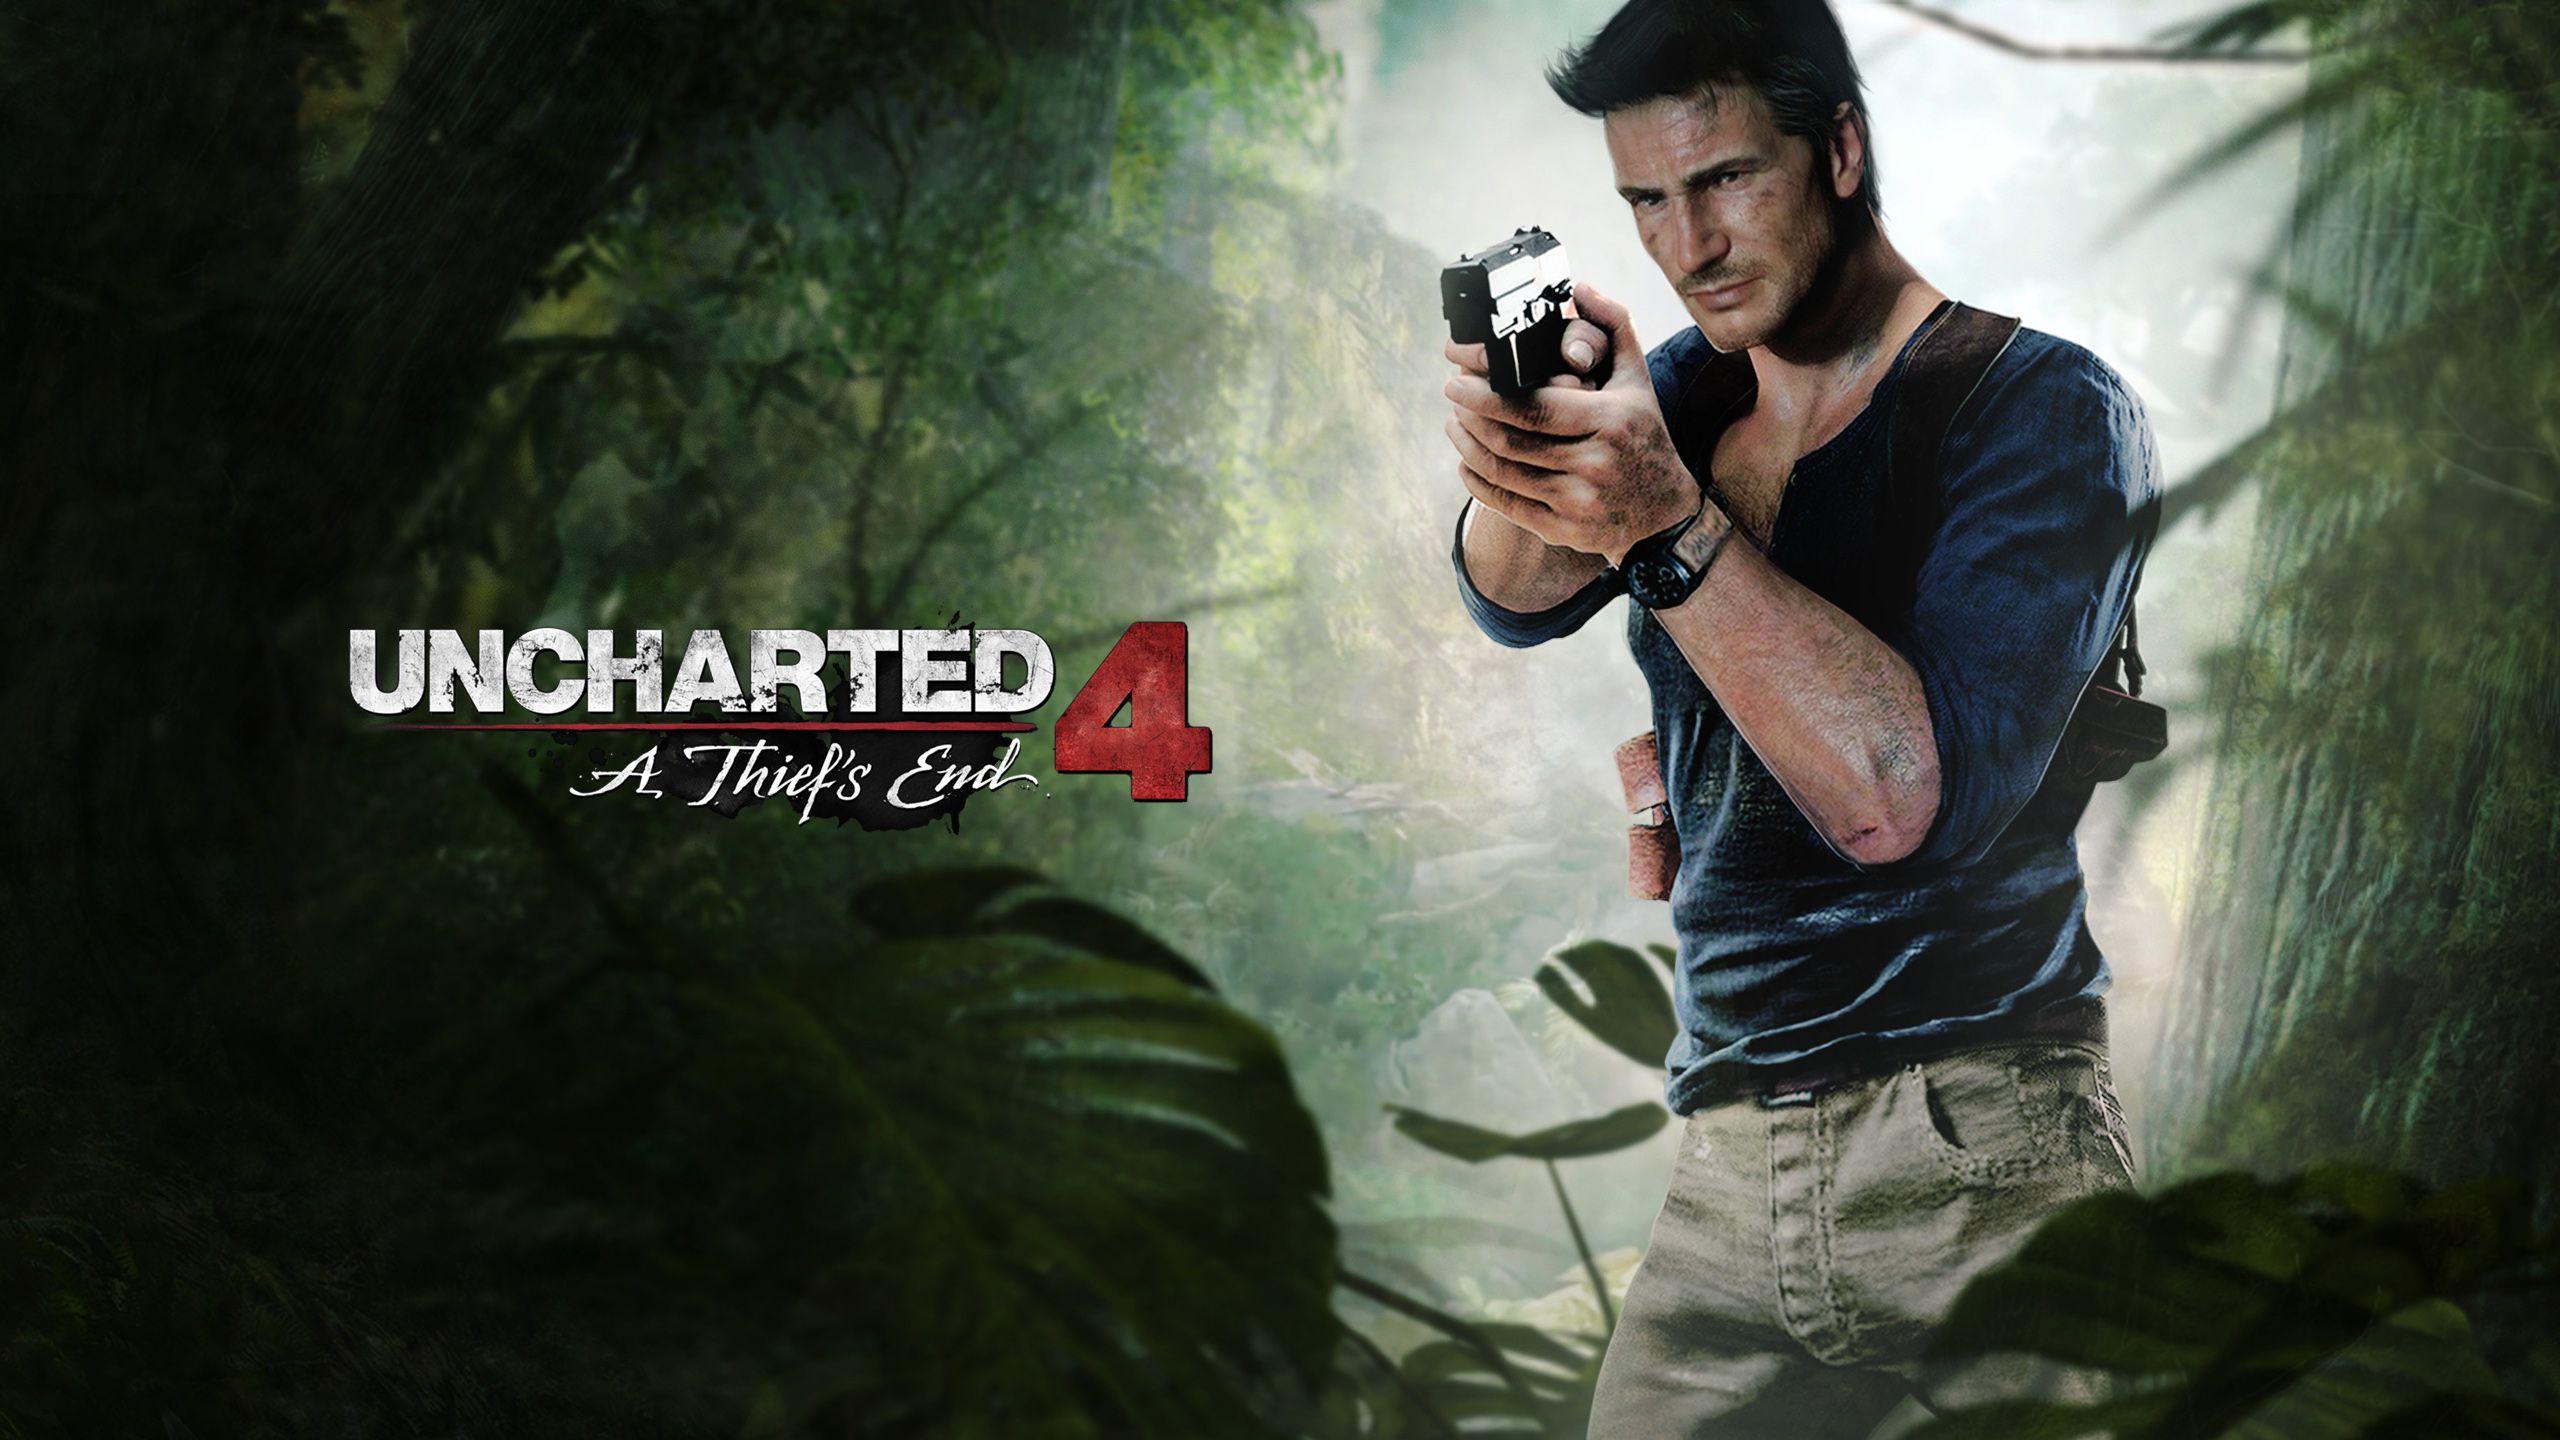 uncharted 1 pc download apunkagames